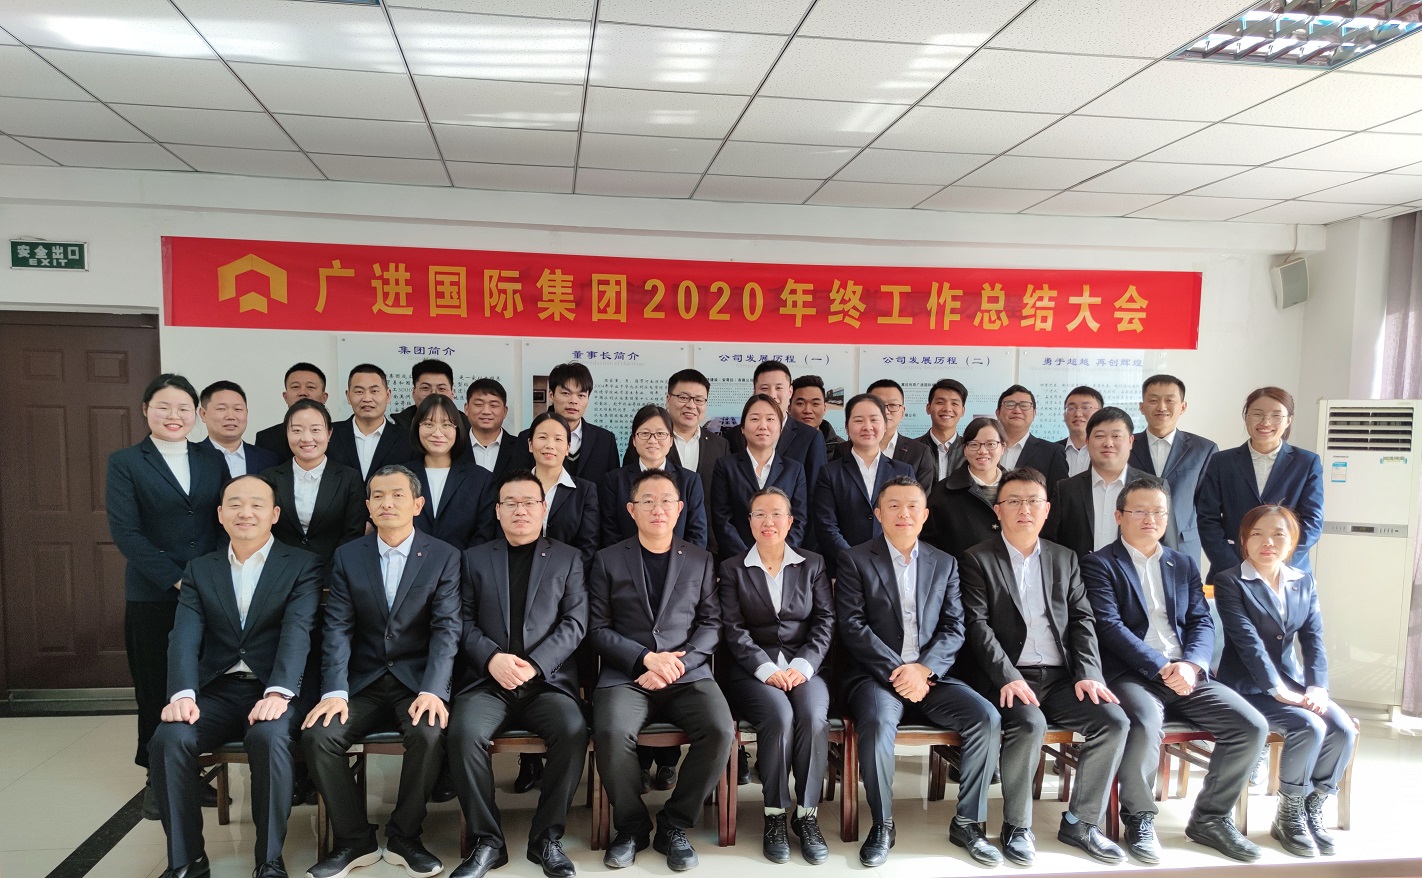 2020 year-end work summary conference